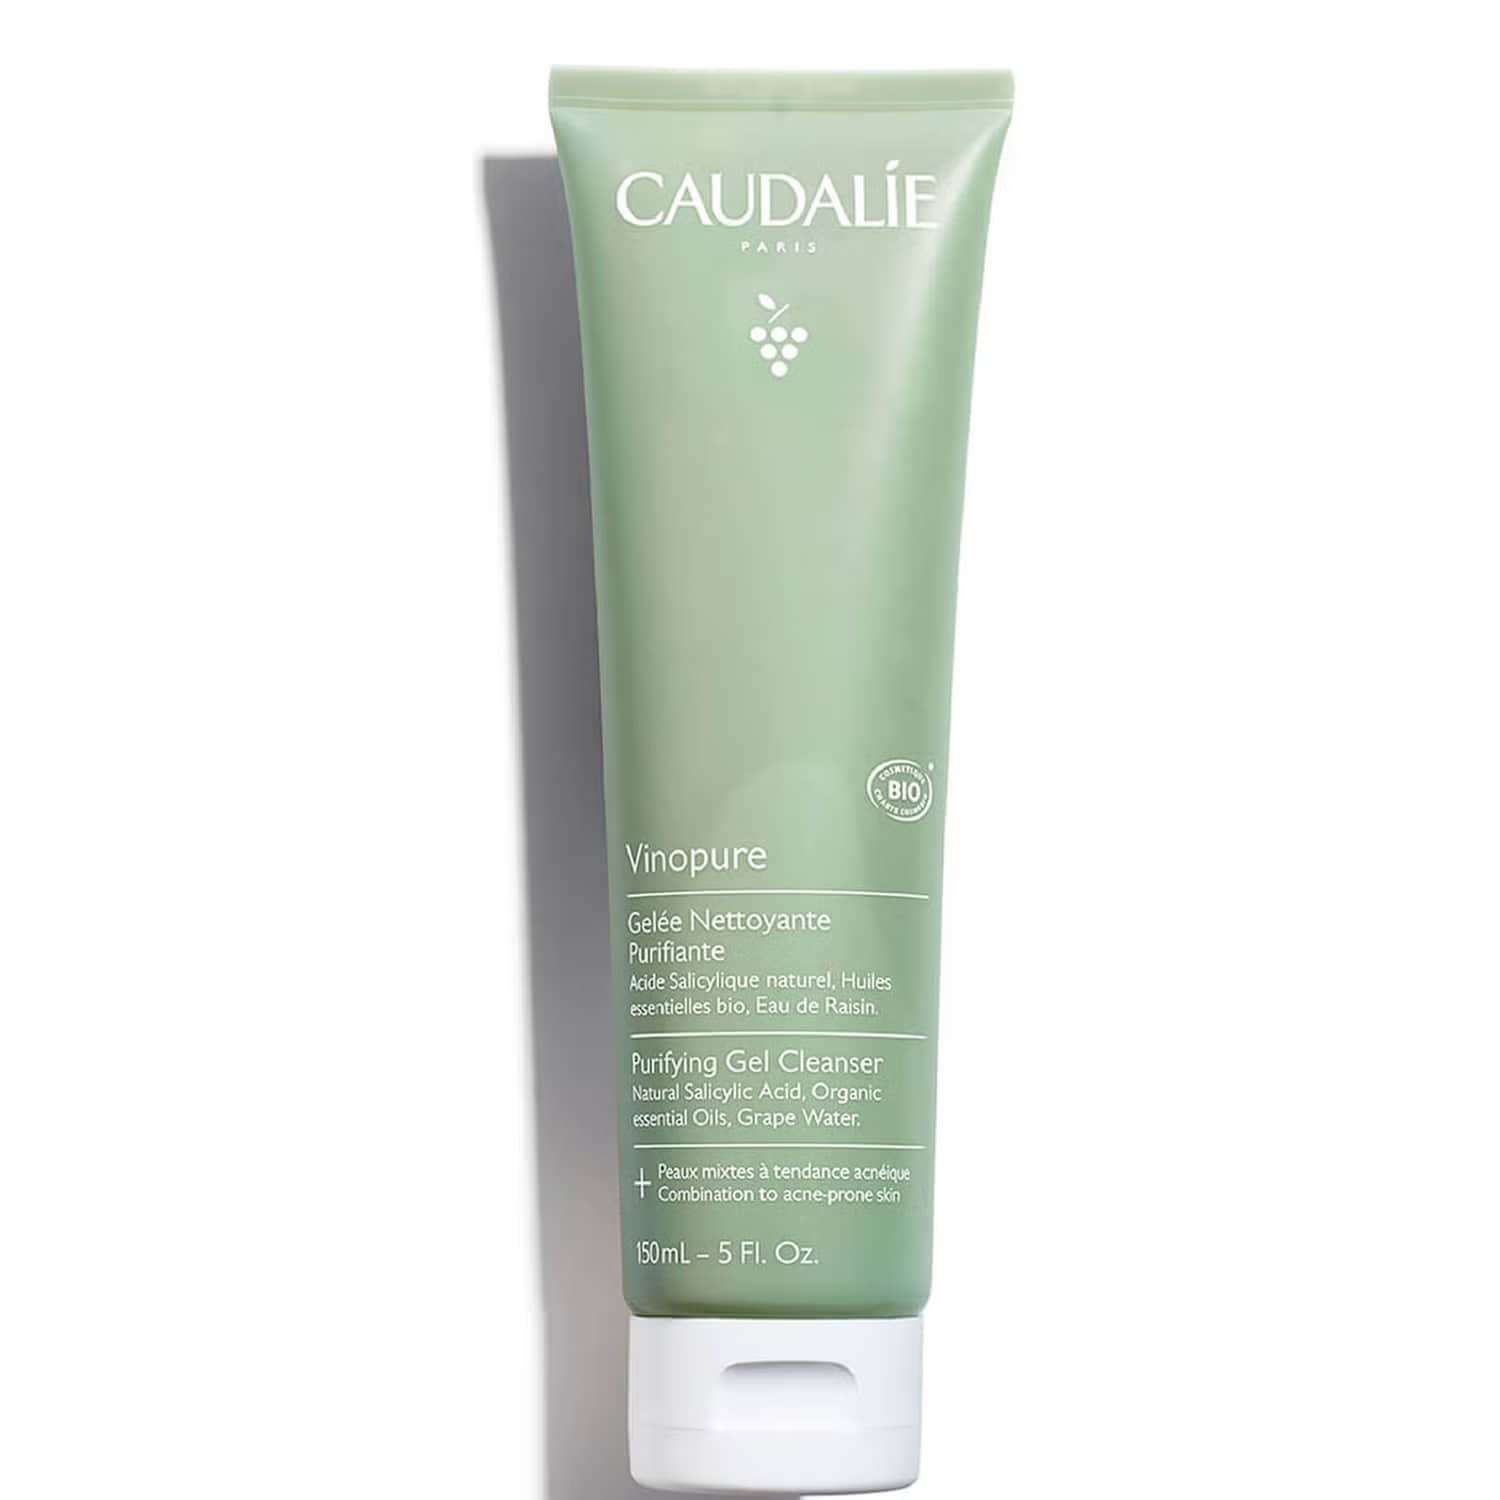 Harness the power of grapefruit extract: Caudalie Vinopure cleanser combats clogged pores on sensitive skin.